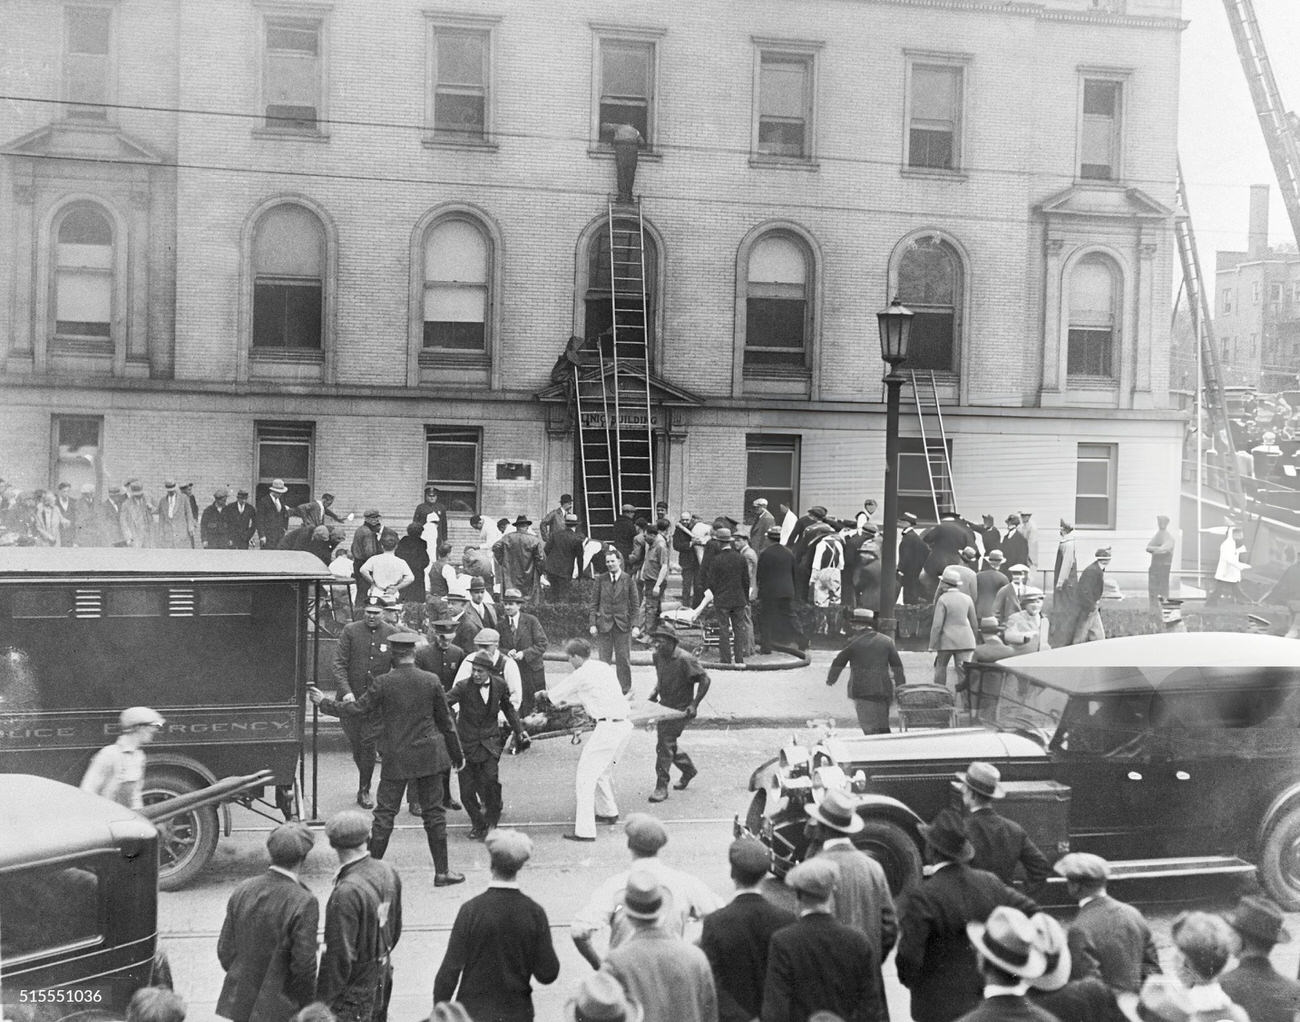 Rescue workers retrieving victims of the Columbus, Ohio prison fire, where over three hundred convicts died, bodies loaded onto Army trucks for transport to a temporary morgue